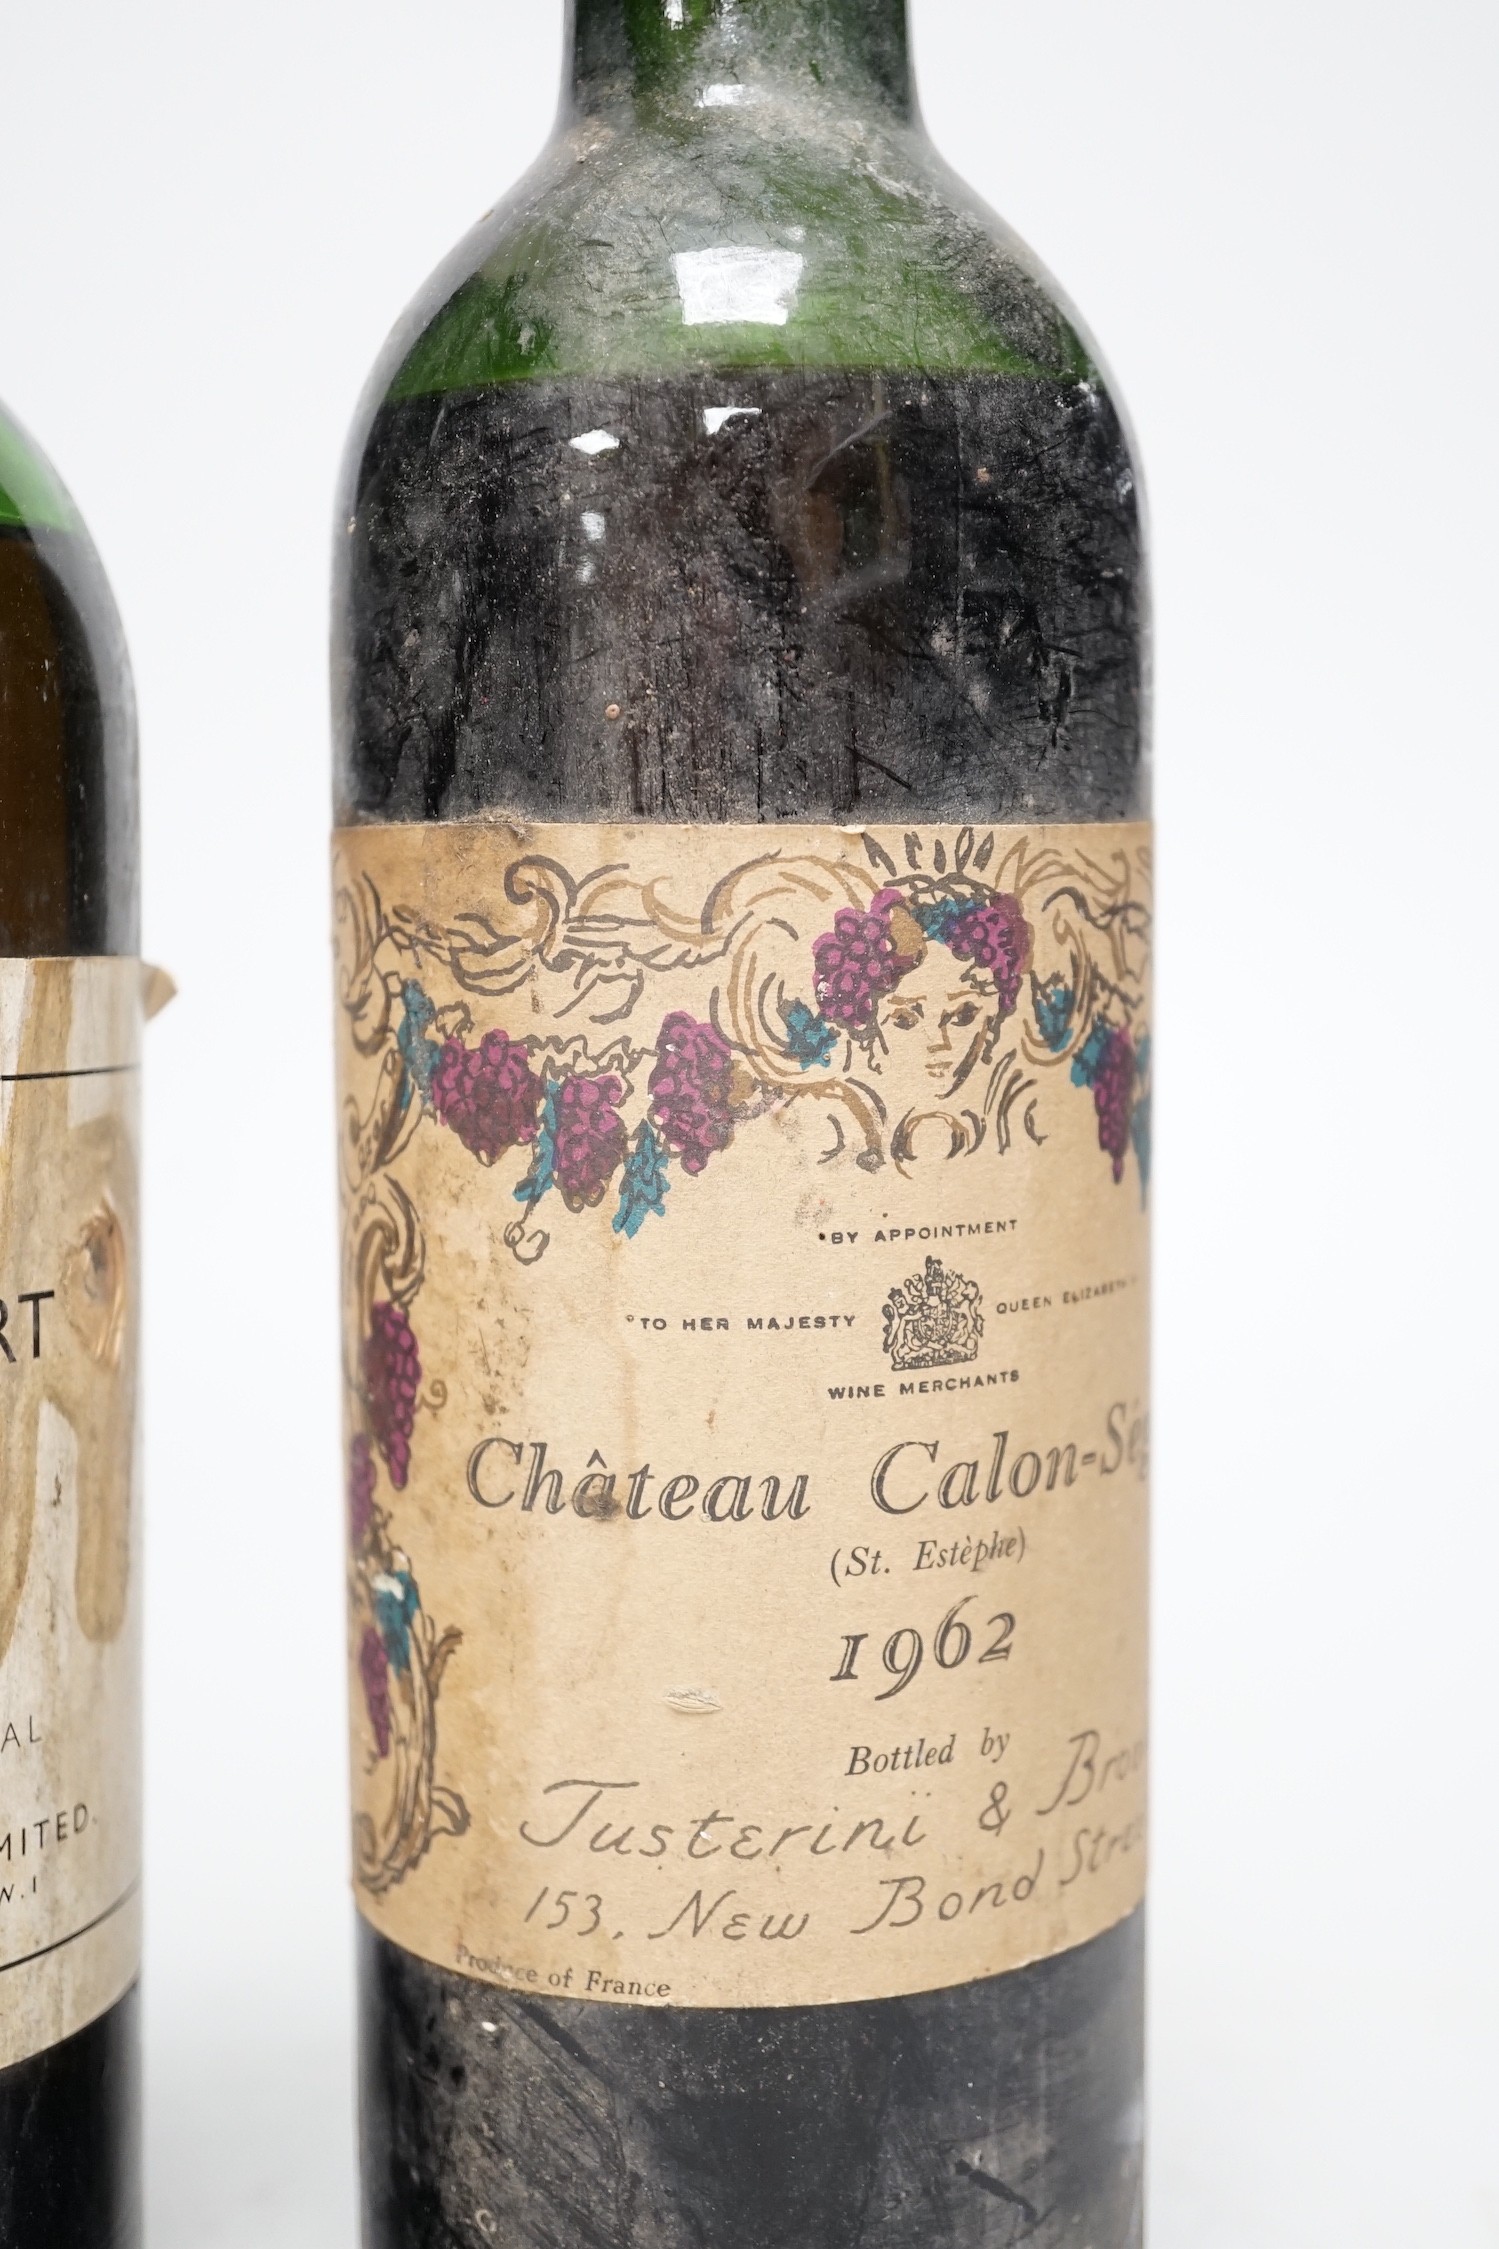 A bottle of Army and Navy stores 1960 vintage port and a bottle of Chateau Calon-Segur 1962 - Image 4 of 5